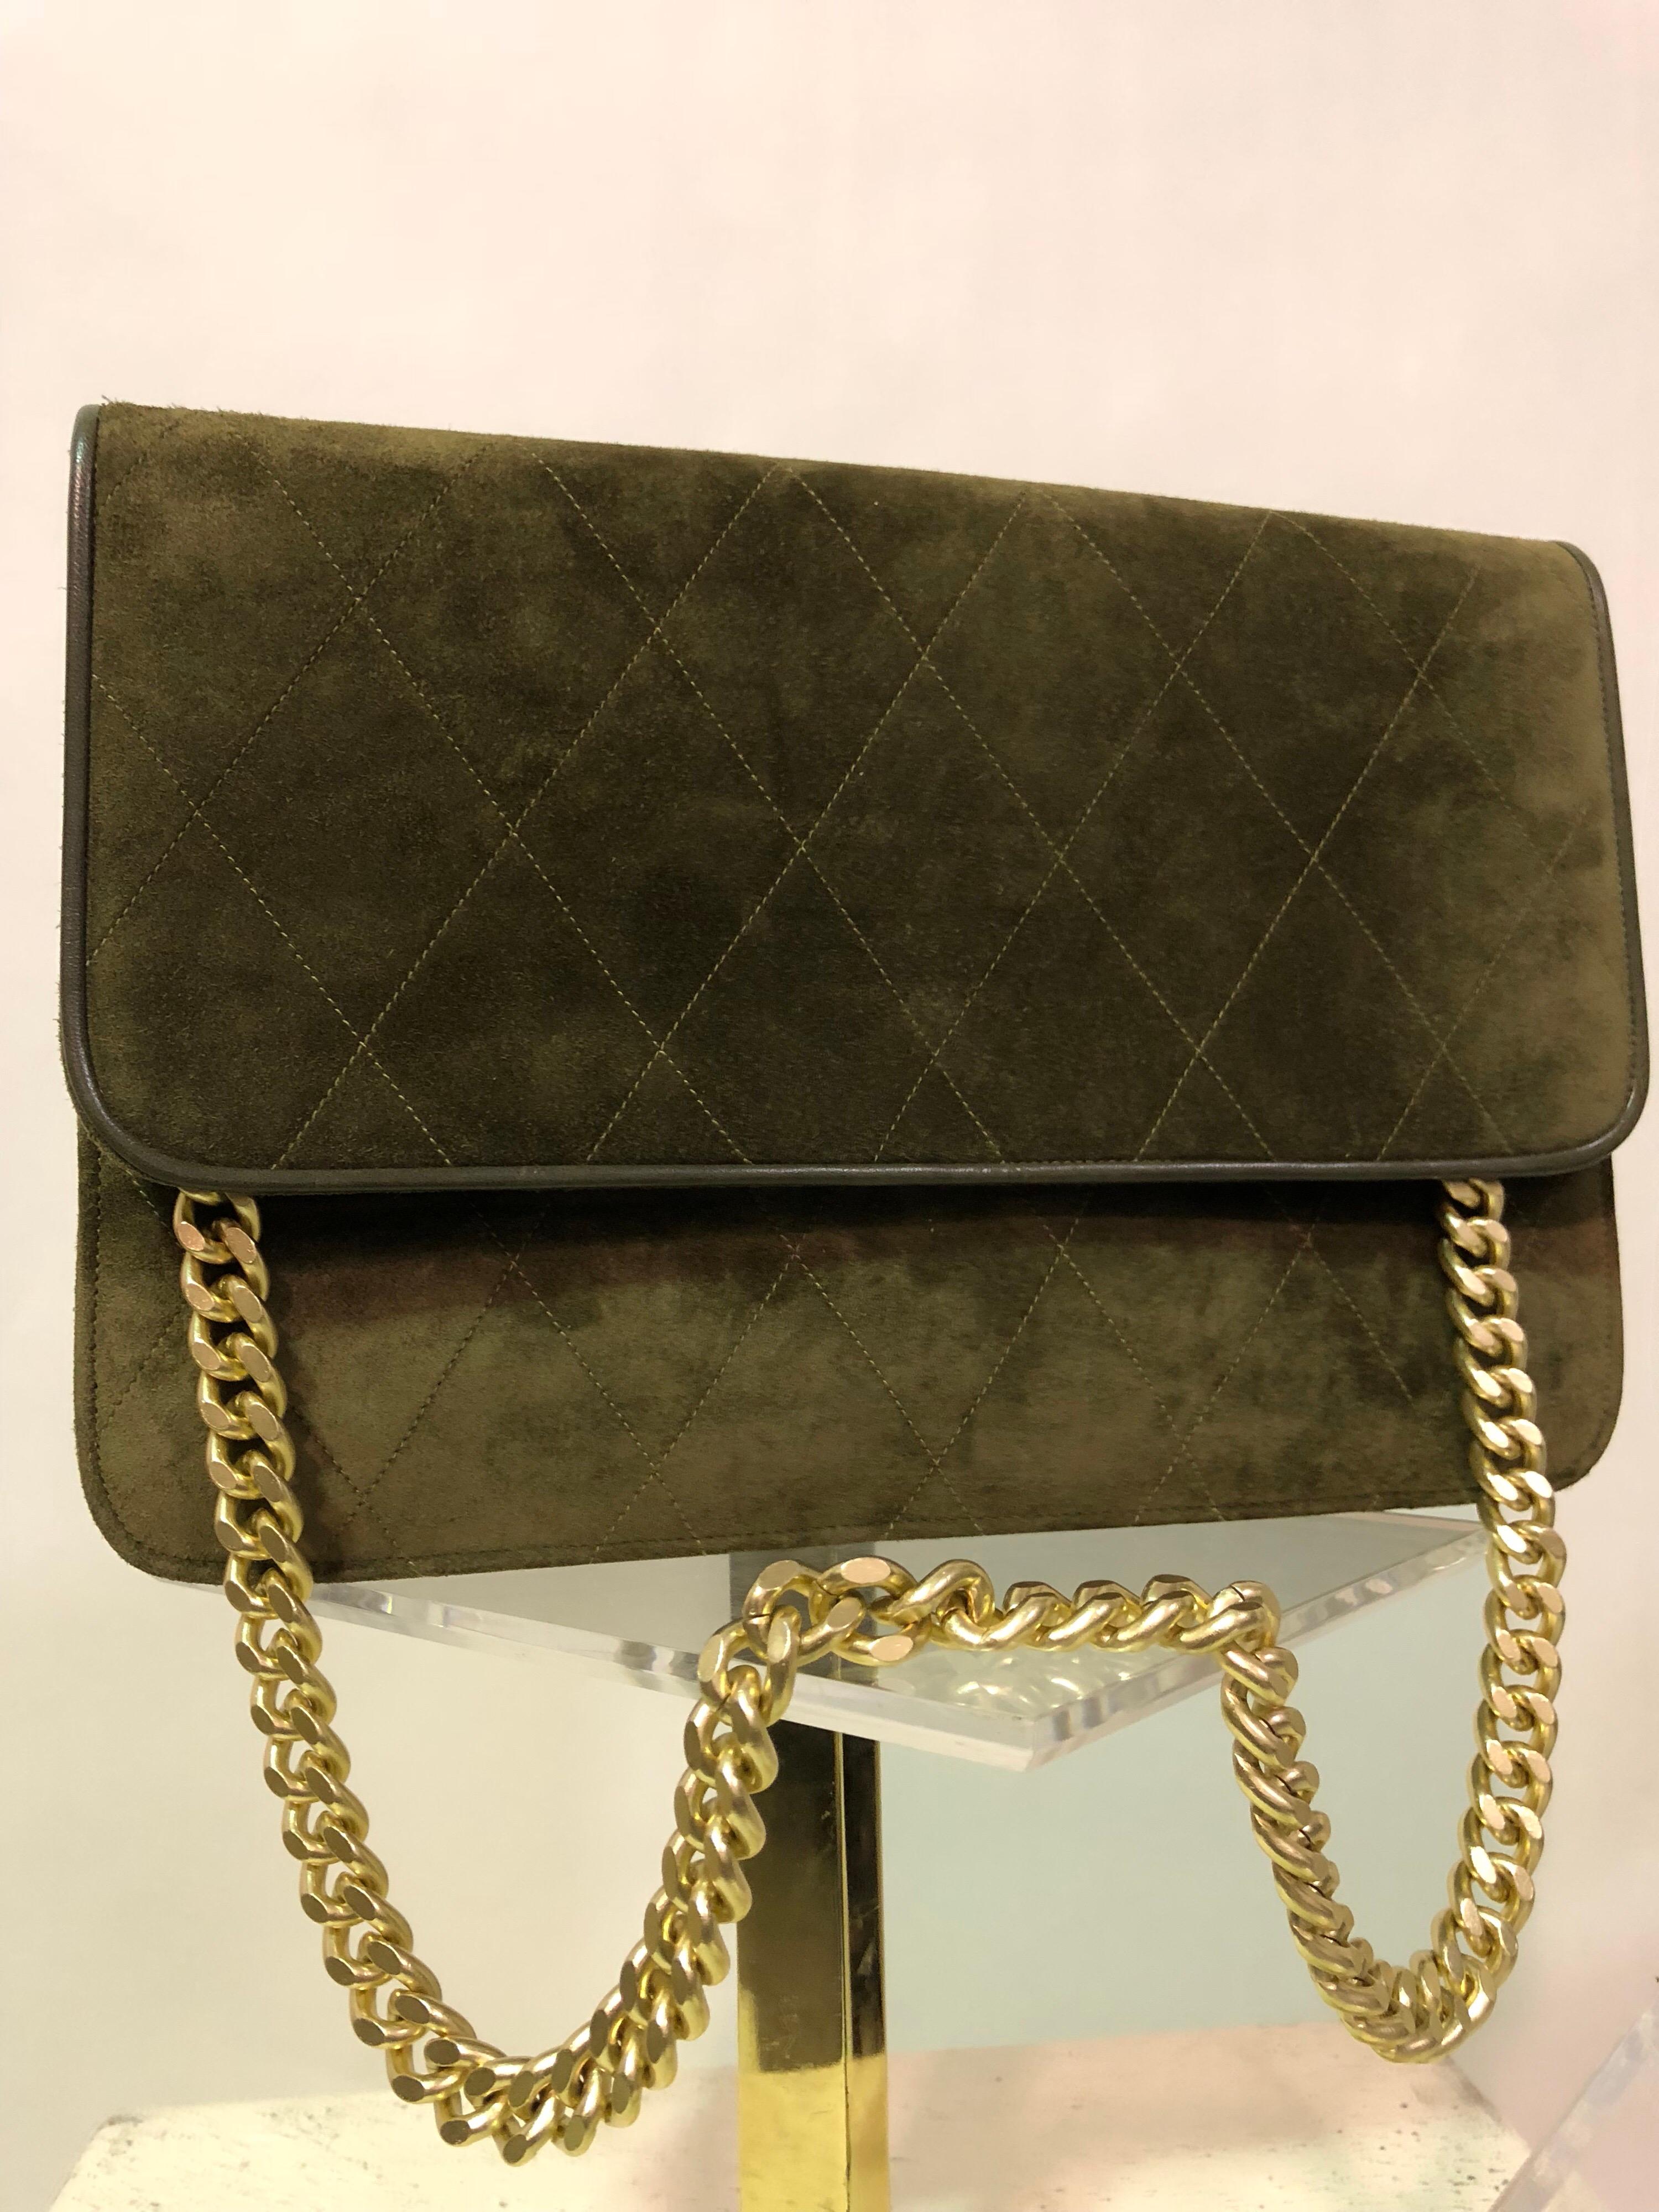 1980s RAYNE London Olive Suede Leather Quilted Handbag With Brushed Gold Chain  In Excellent Condition For Sale In Gresham, OR